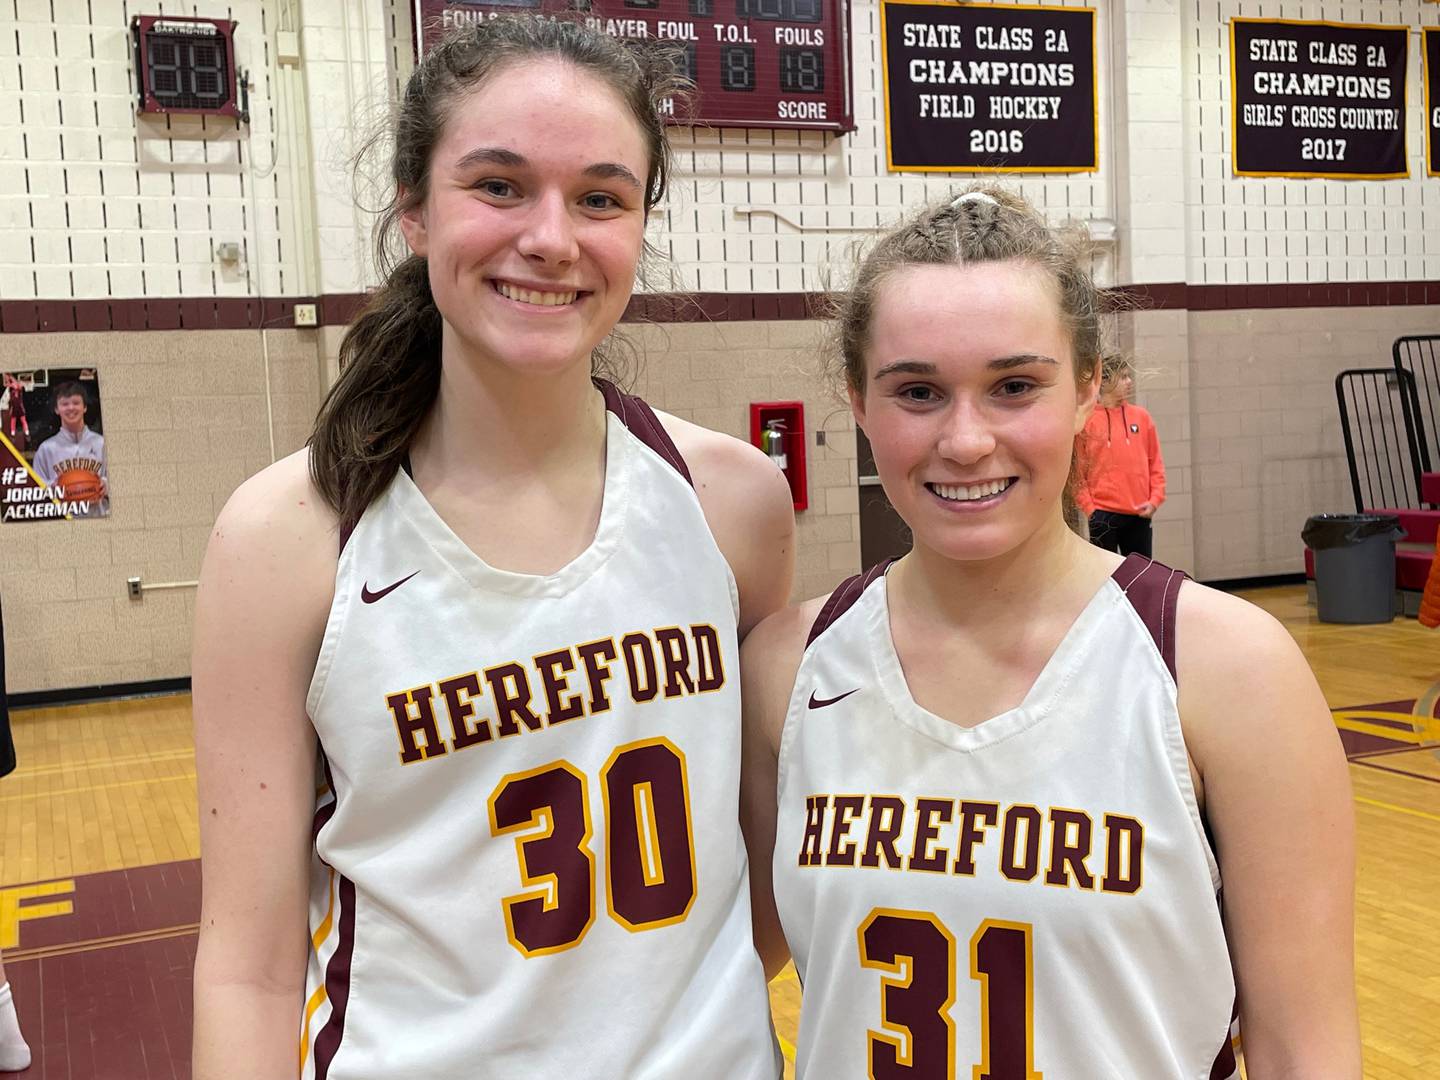 Junior forward Lauren Kraft (30) and senior guard Lauren Orner (31) combined for 20 points and 15 rebounds to lead Hereford to a 37-24 victory over Harford Tech in Friday night's Class 2A state quarterfinal.